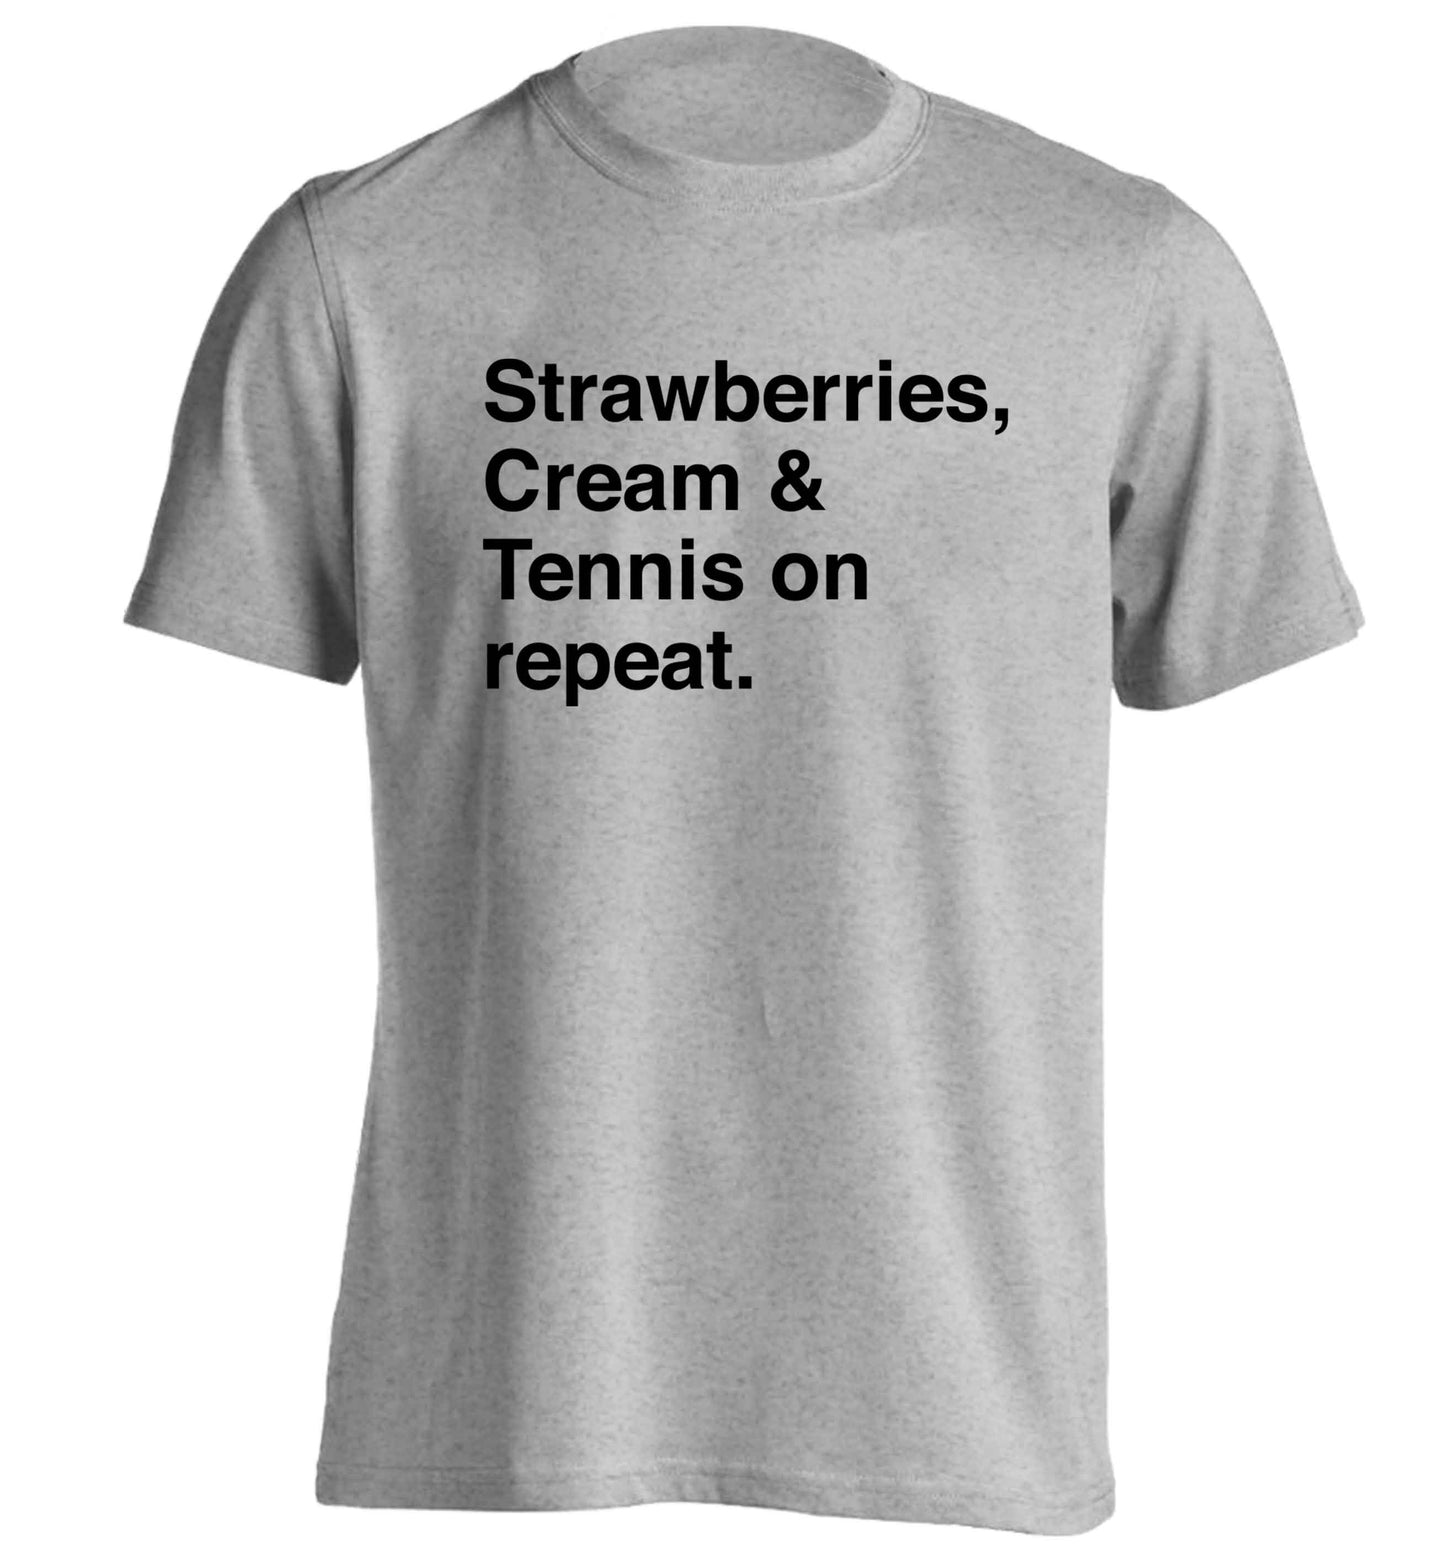 Strawberries, cream and tennis on repeat adults unisex grey Tshirt 2XL